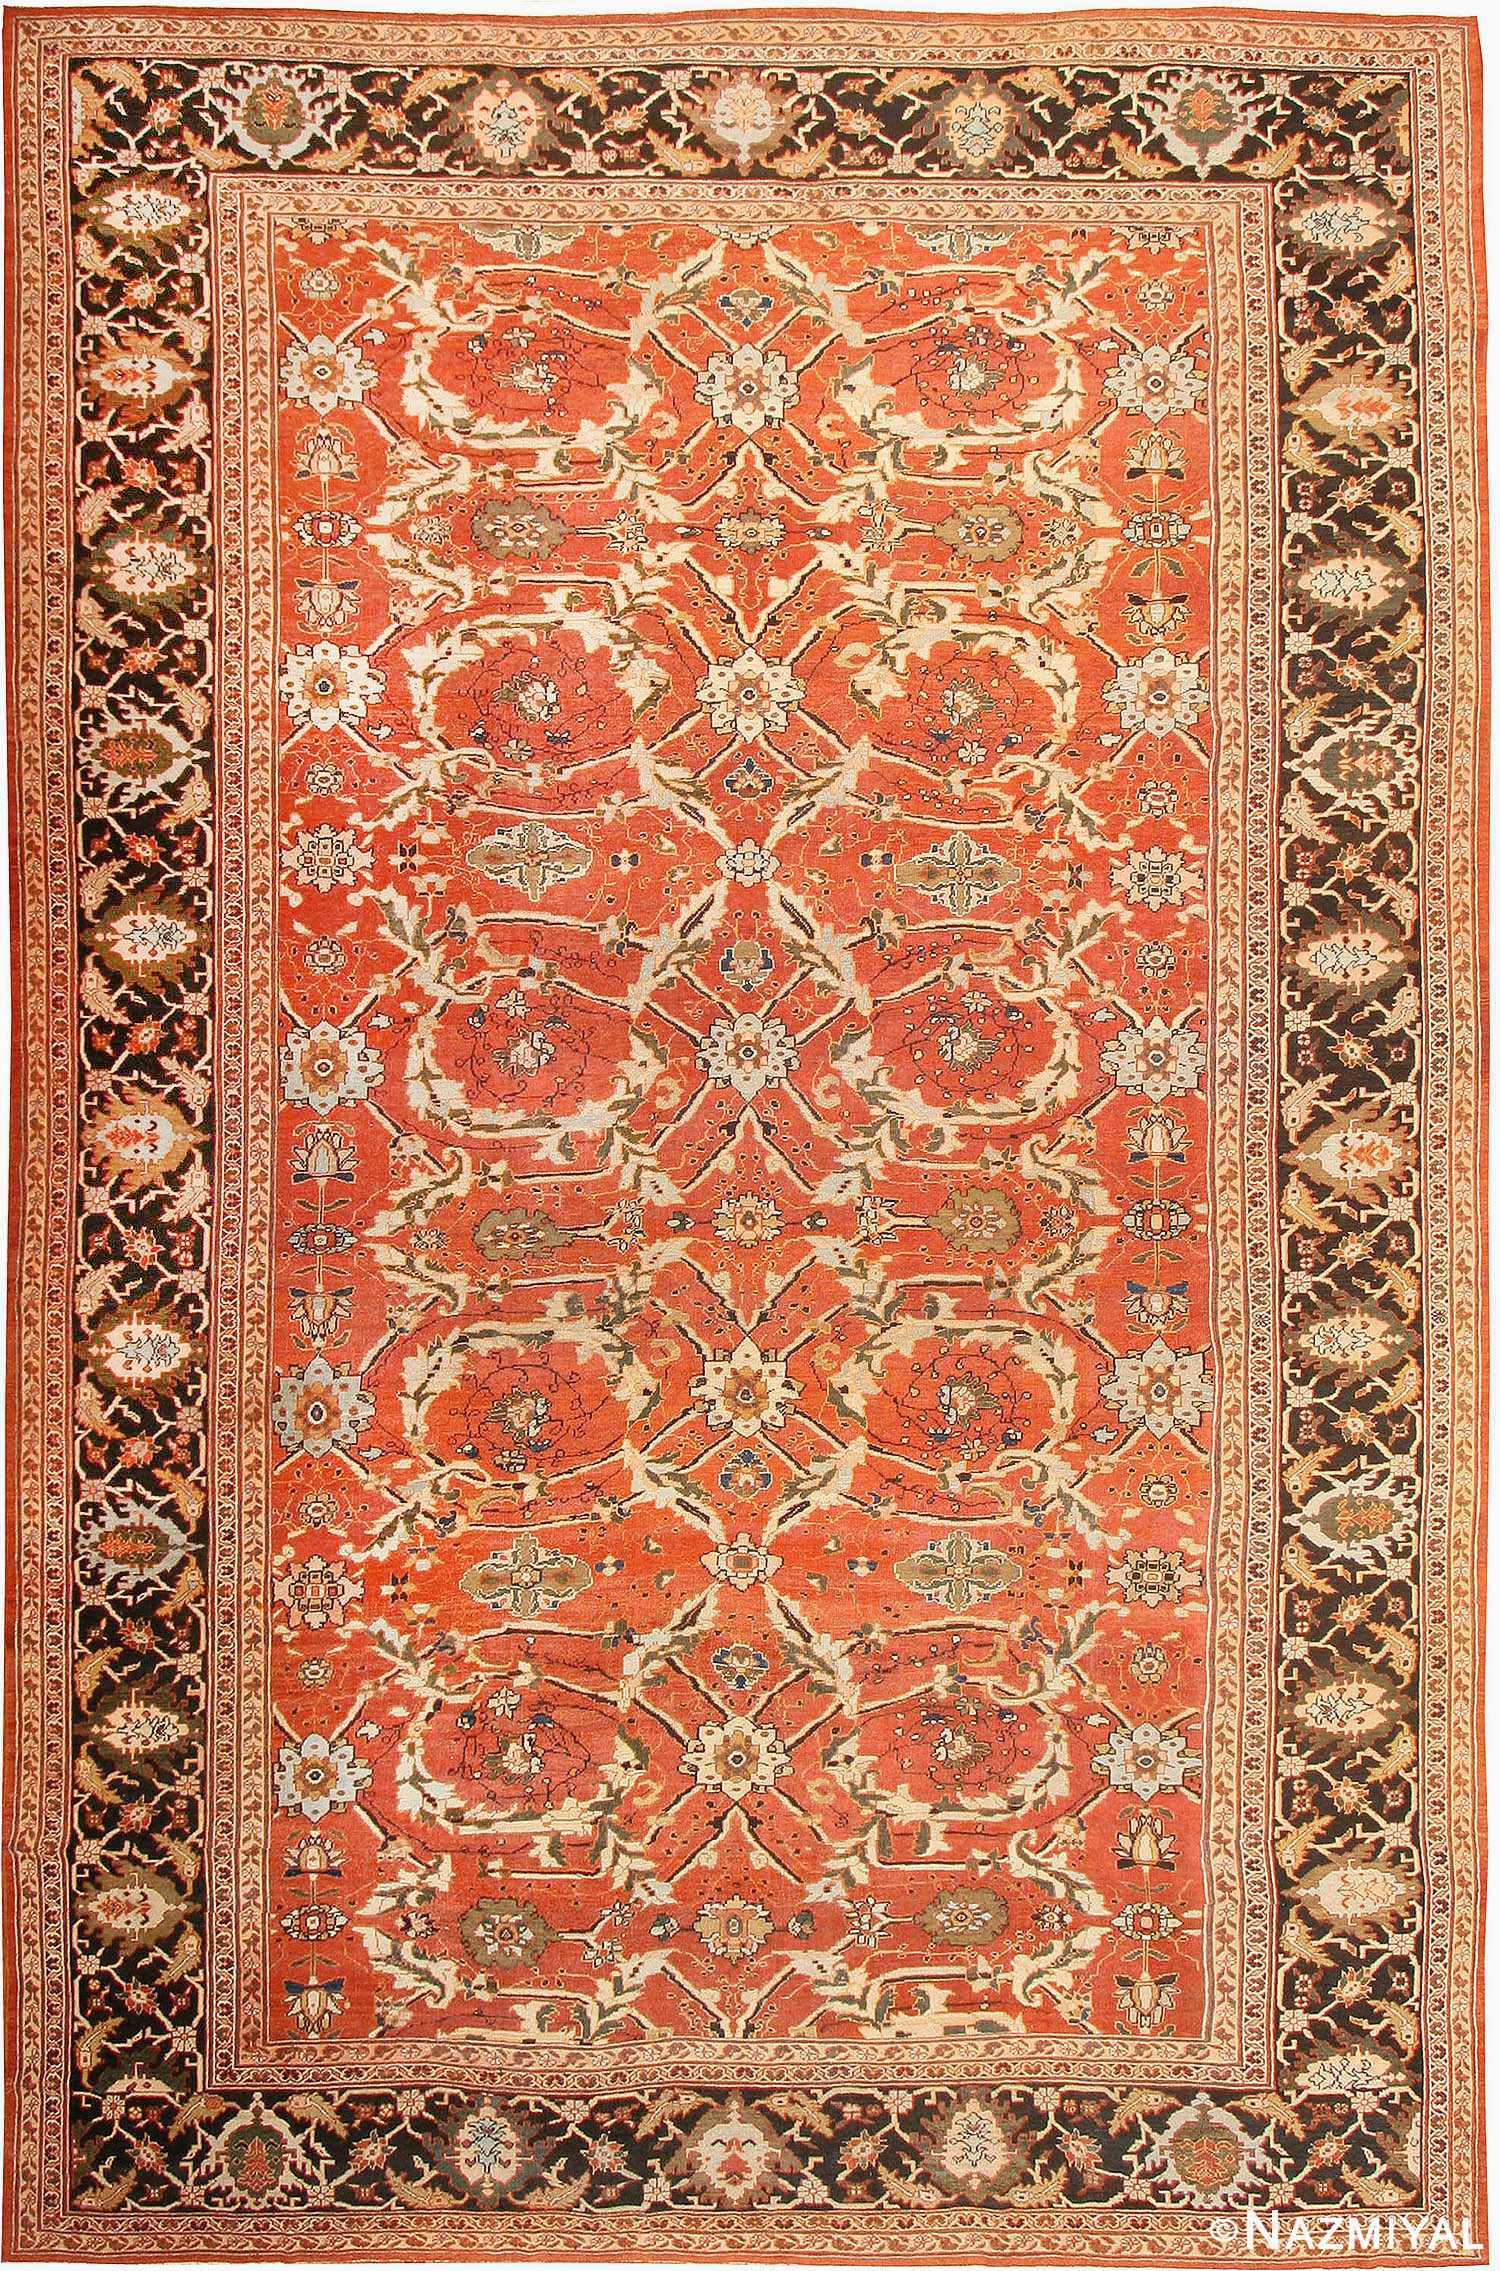 Large Oversized Antique Rust Color Persian Sultanabad Area Rug 42746 by Nazmiyal Antique Rugs